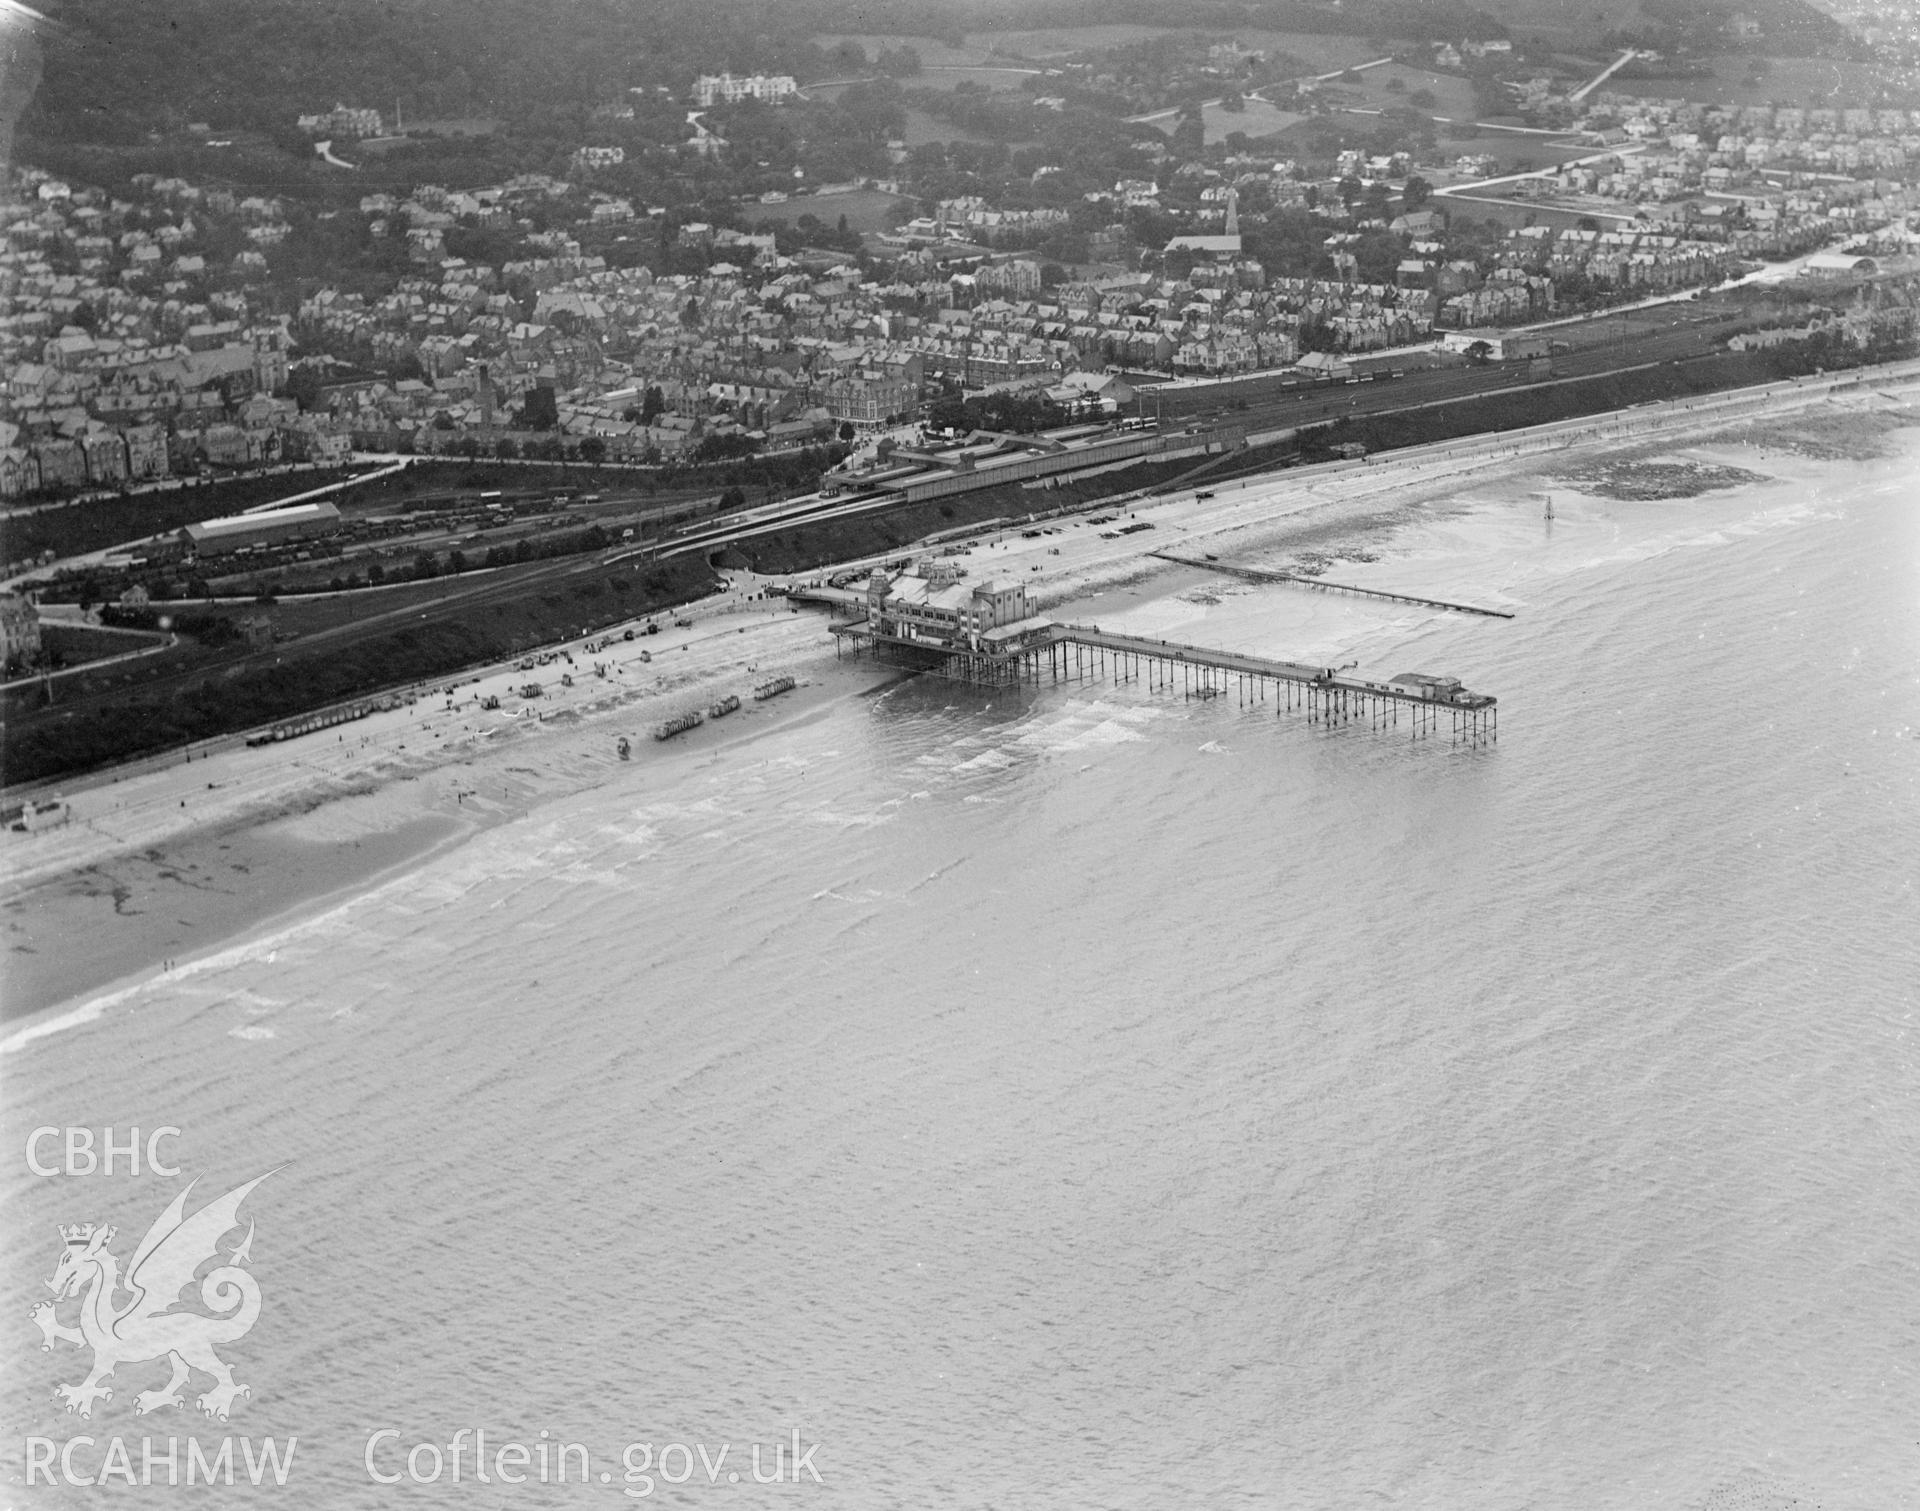 View of Colwyn Bay showing pier, oblique aerial view. 5?x4? black and white glass plate negative.